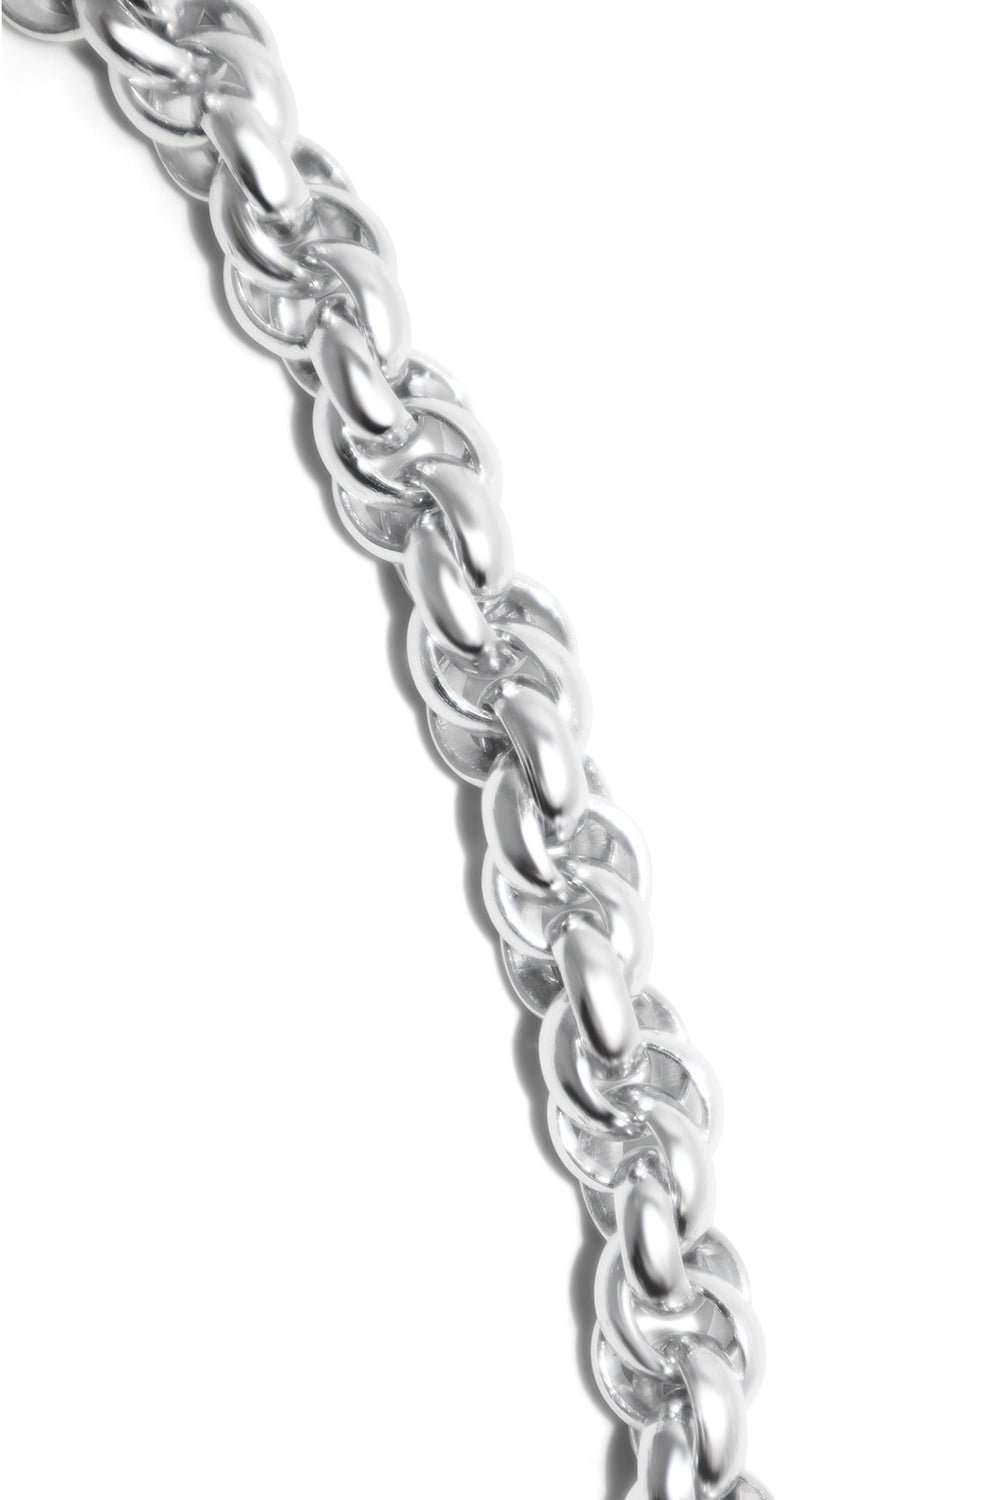 Two Braided Silver Chain for Men